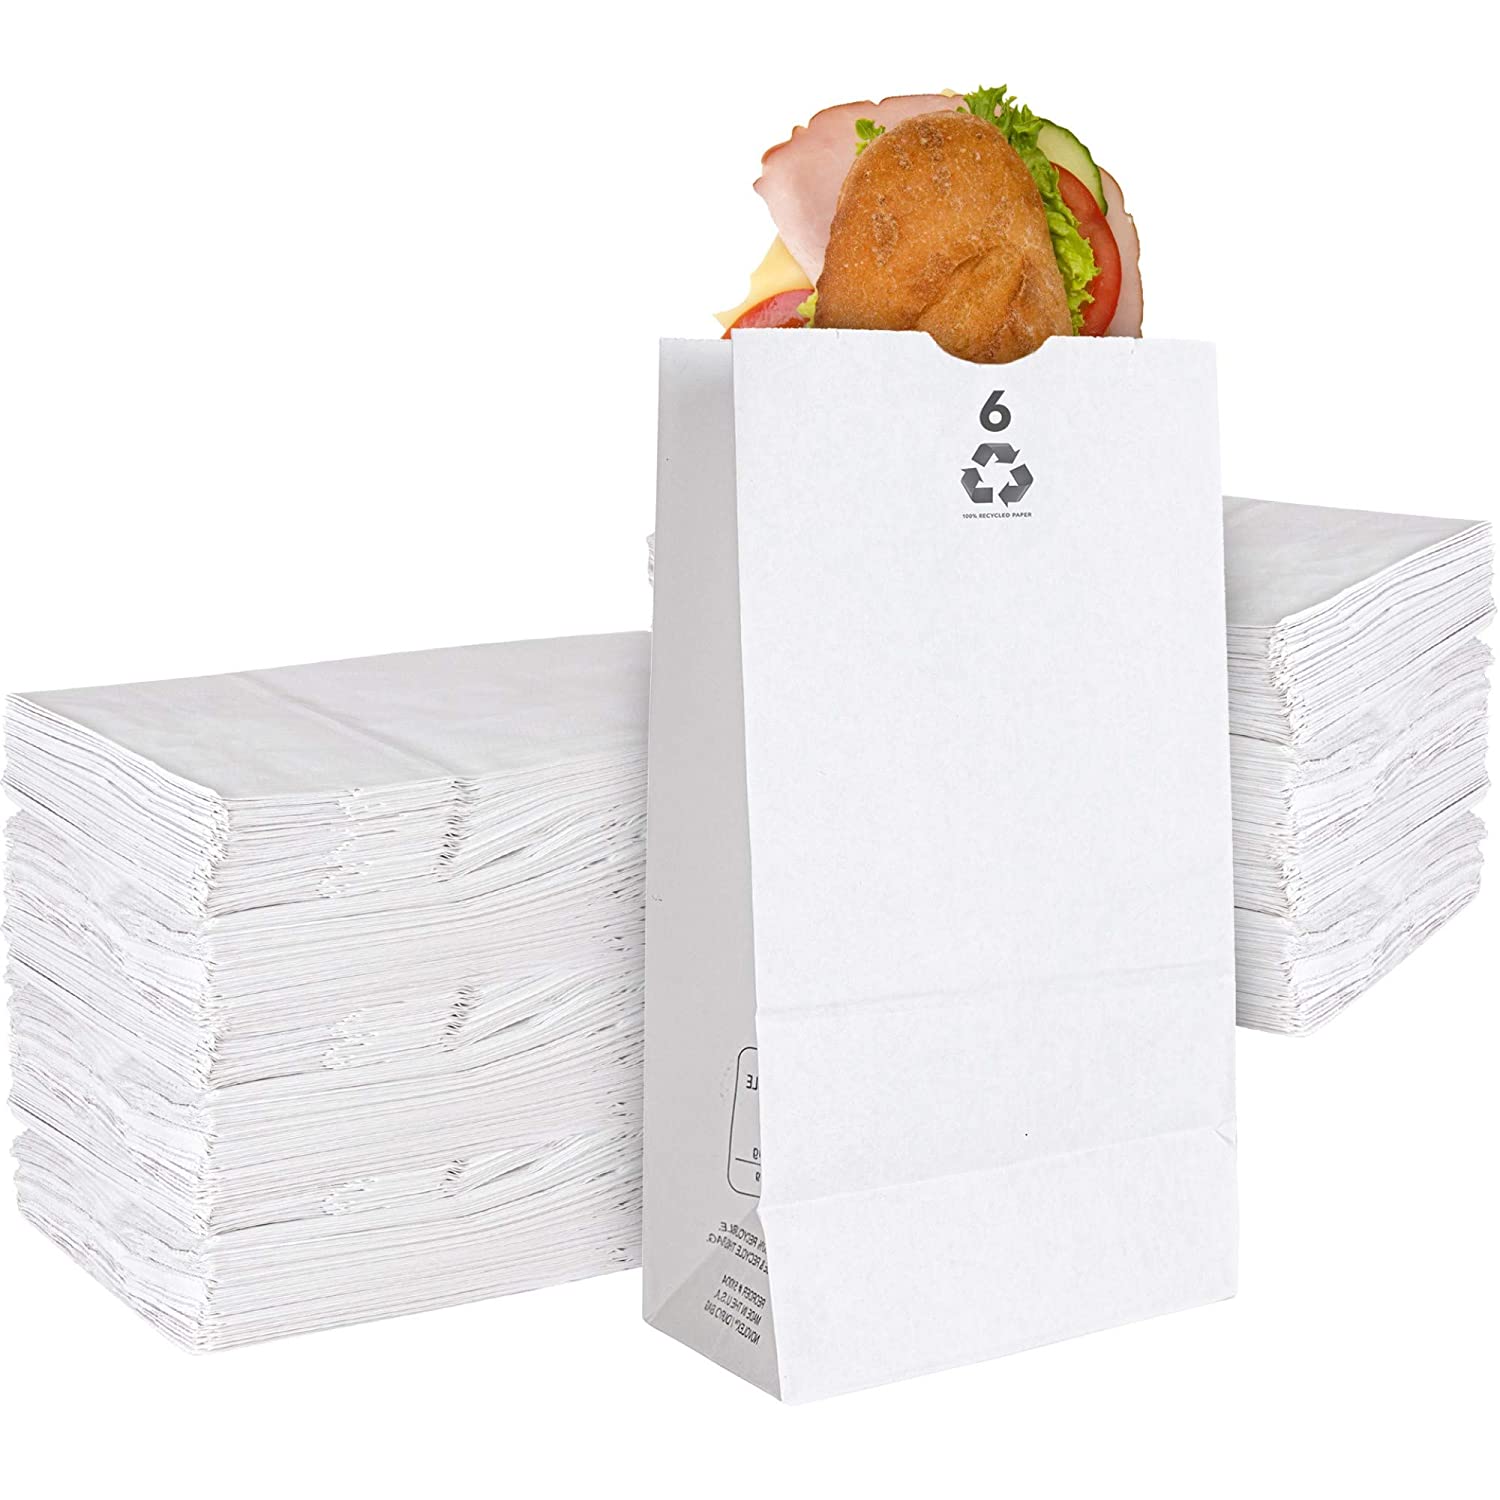 Stock Your Home 6 Lb White Paper Bags (200 Count) - Eco Friendly White